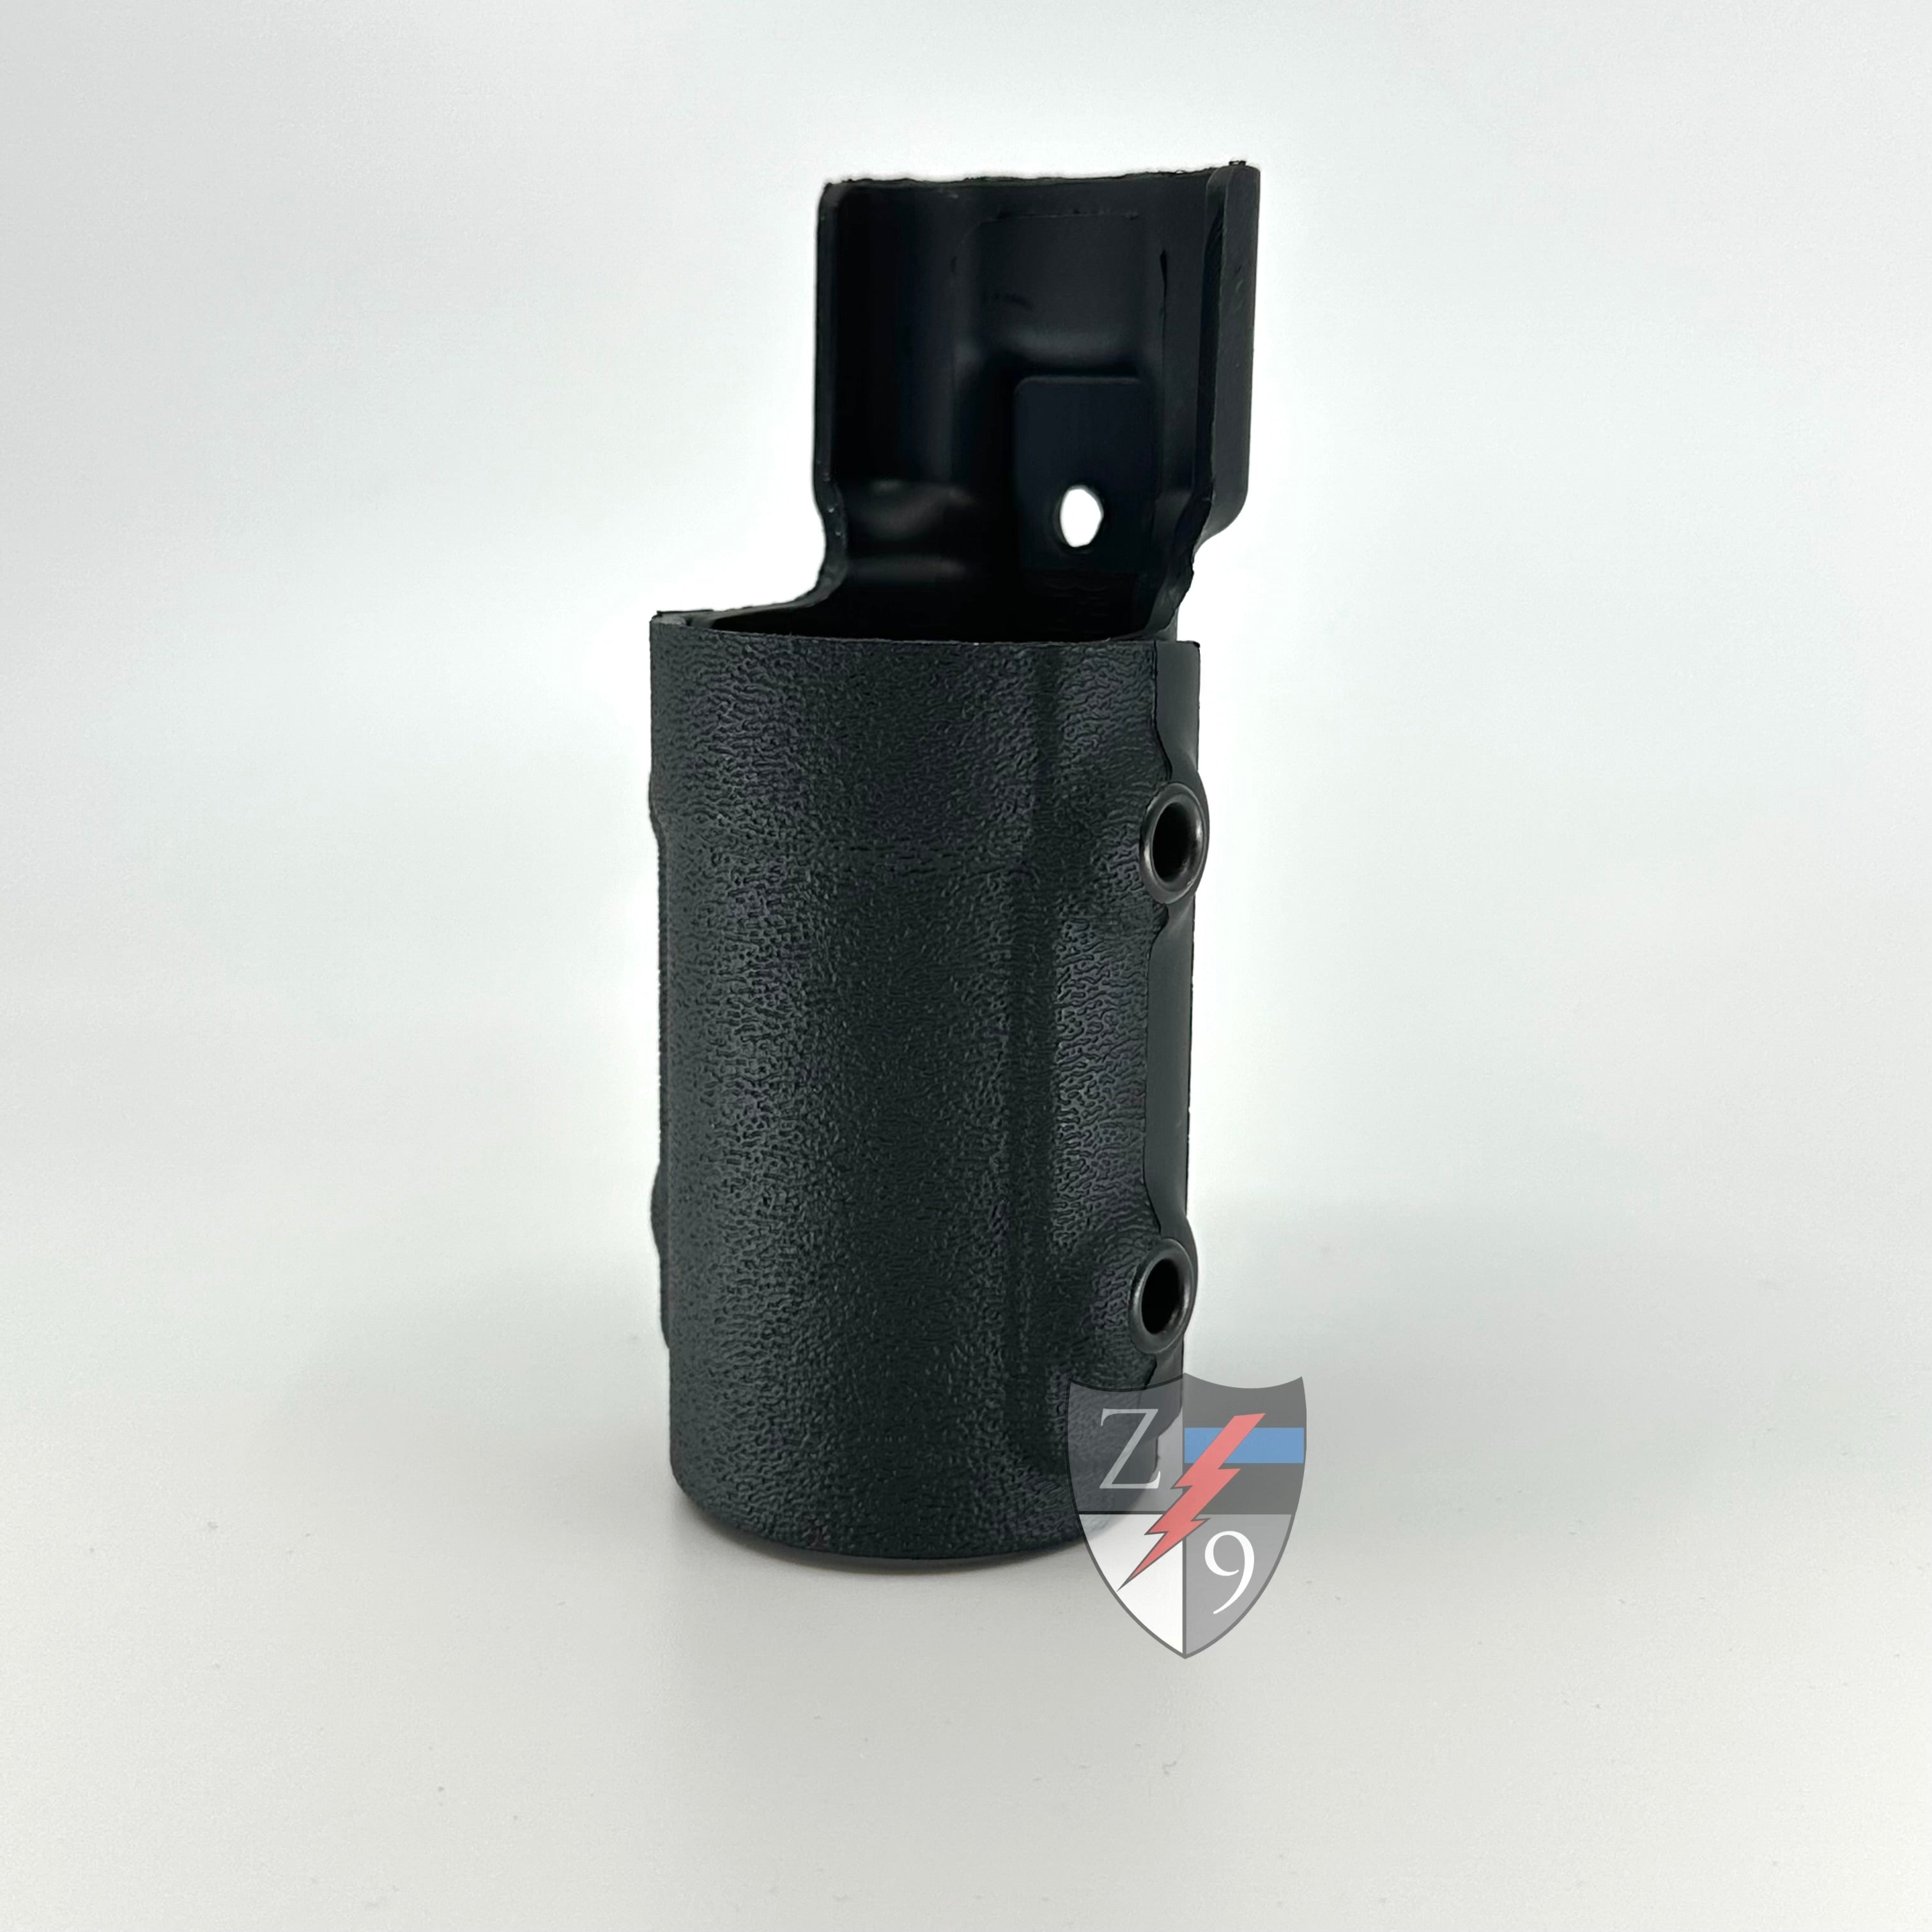 Flashlight/Pepper Spray Holder MOLLE - Joint Force Tactical